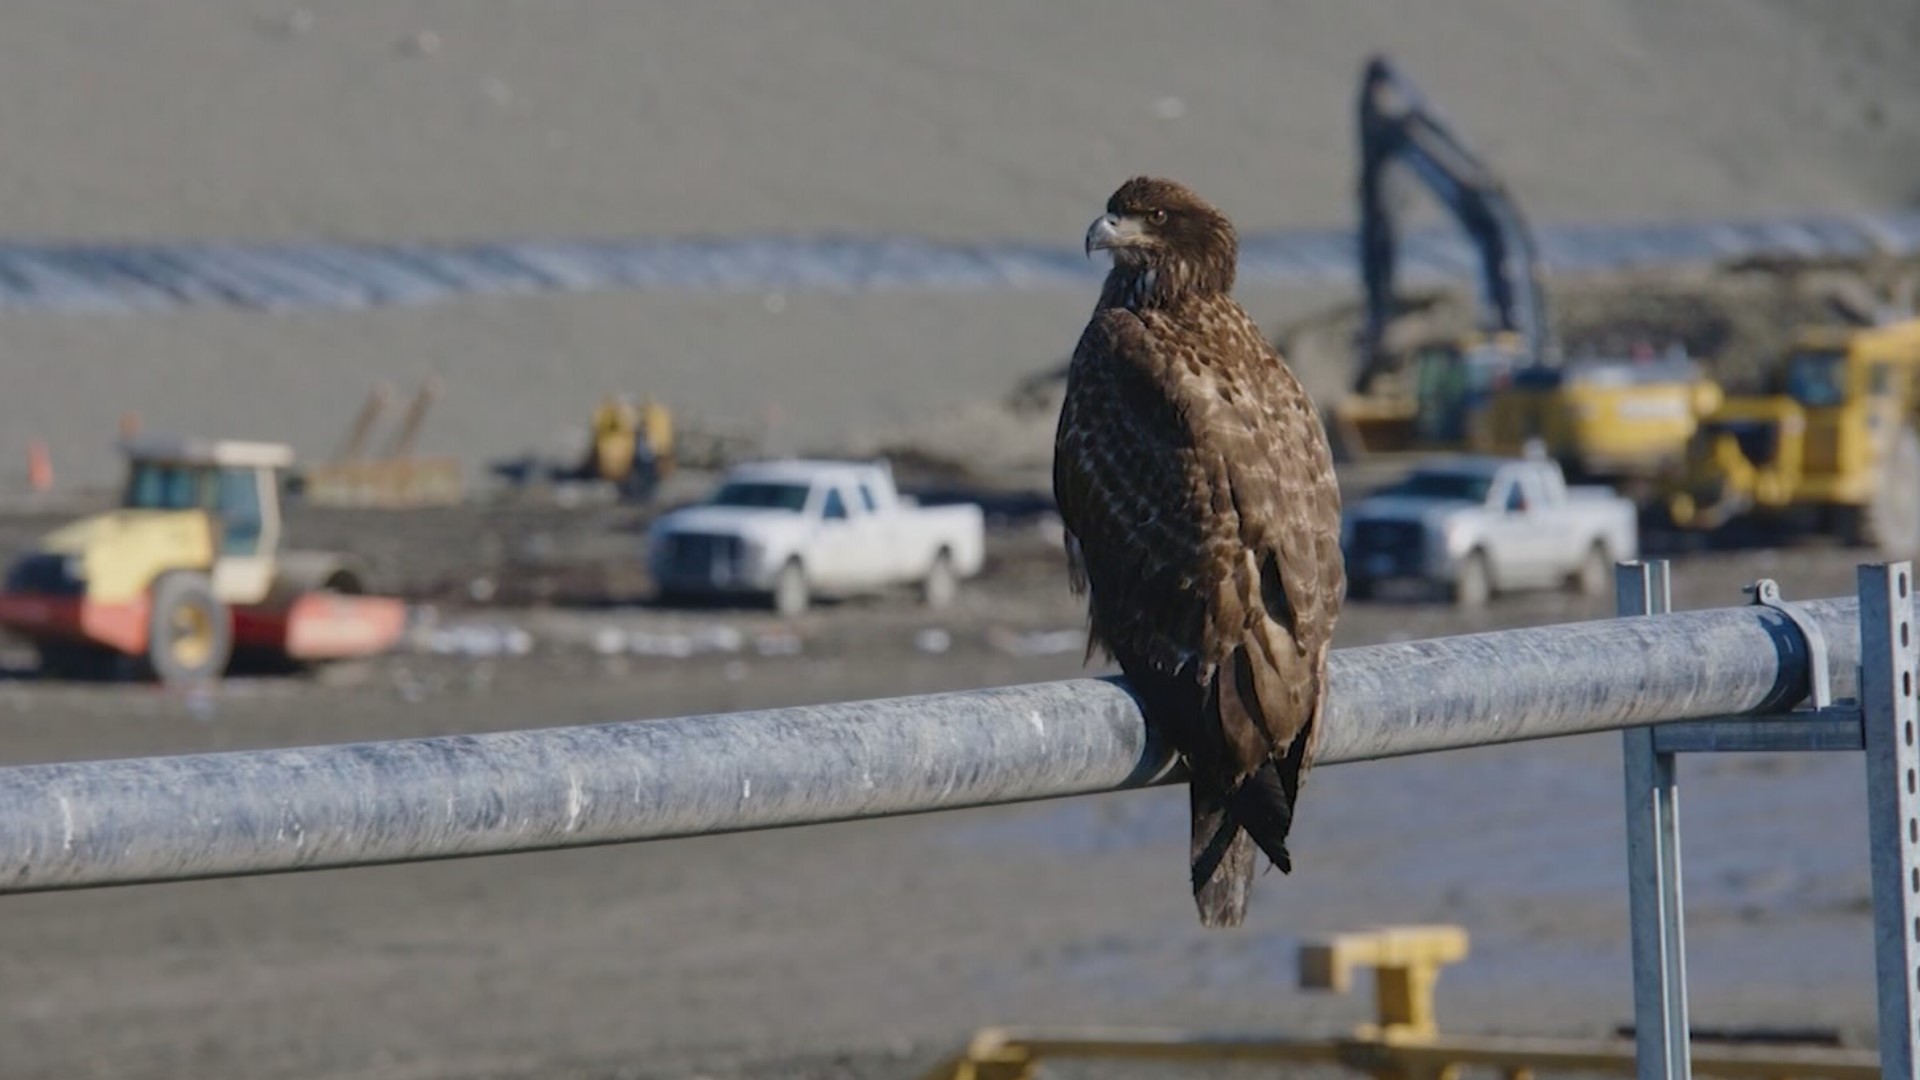 Since bald eagles are federally protected, the county has been unable to haze them directly. The eagles take waste out of a landfill, causing concern for residents.